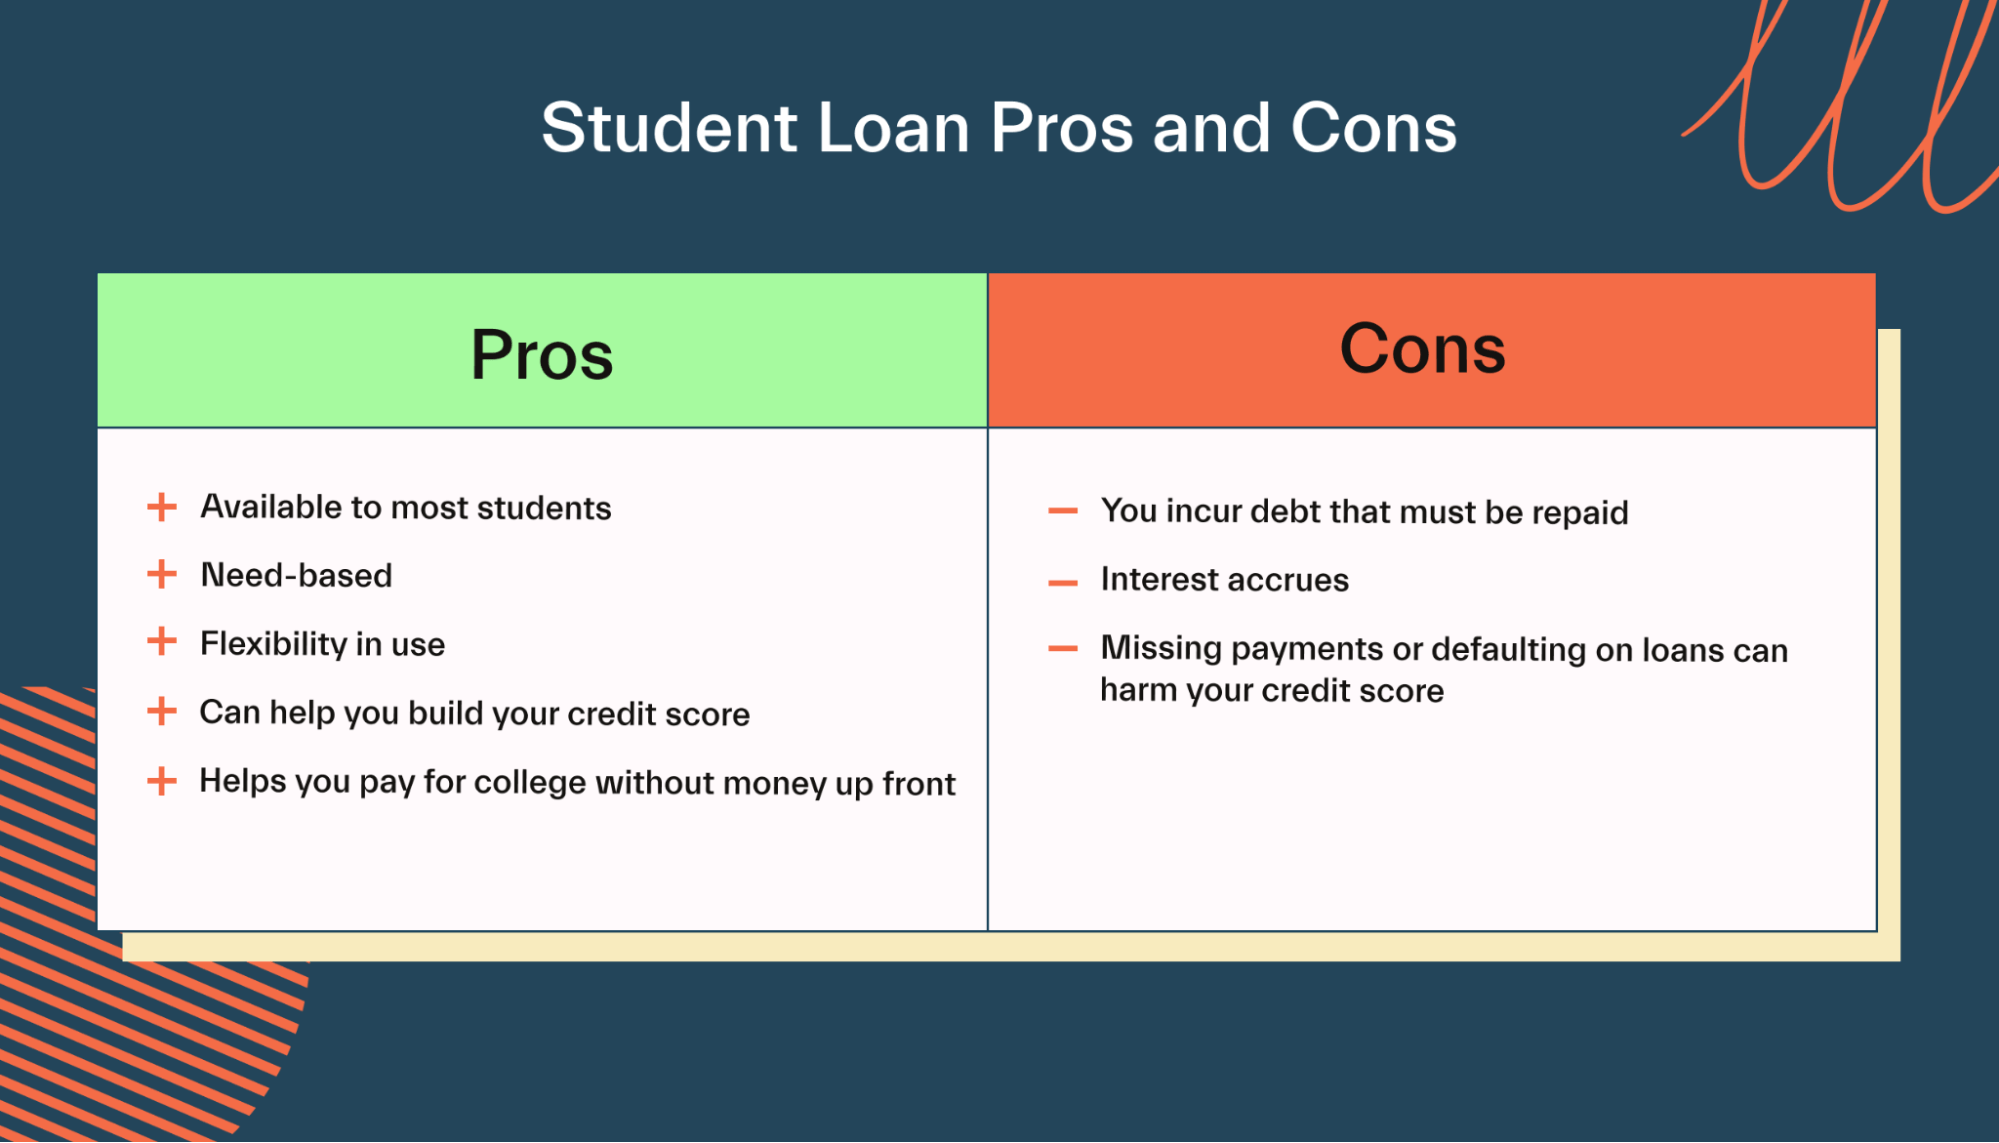 Student Loan Pros and Cons